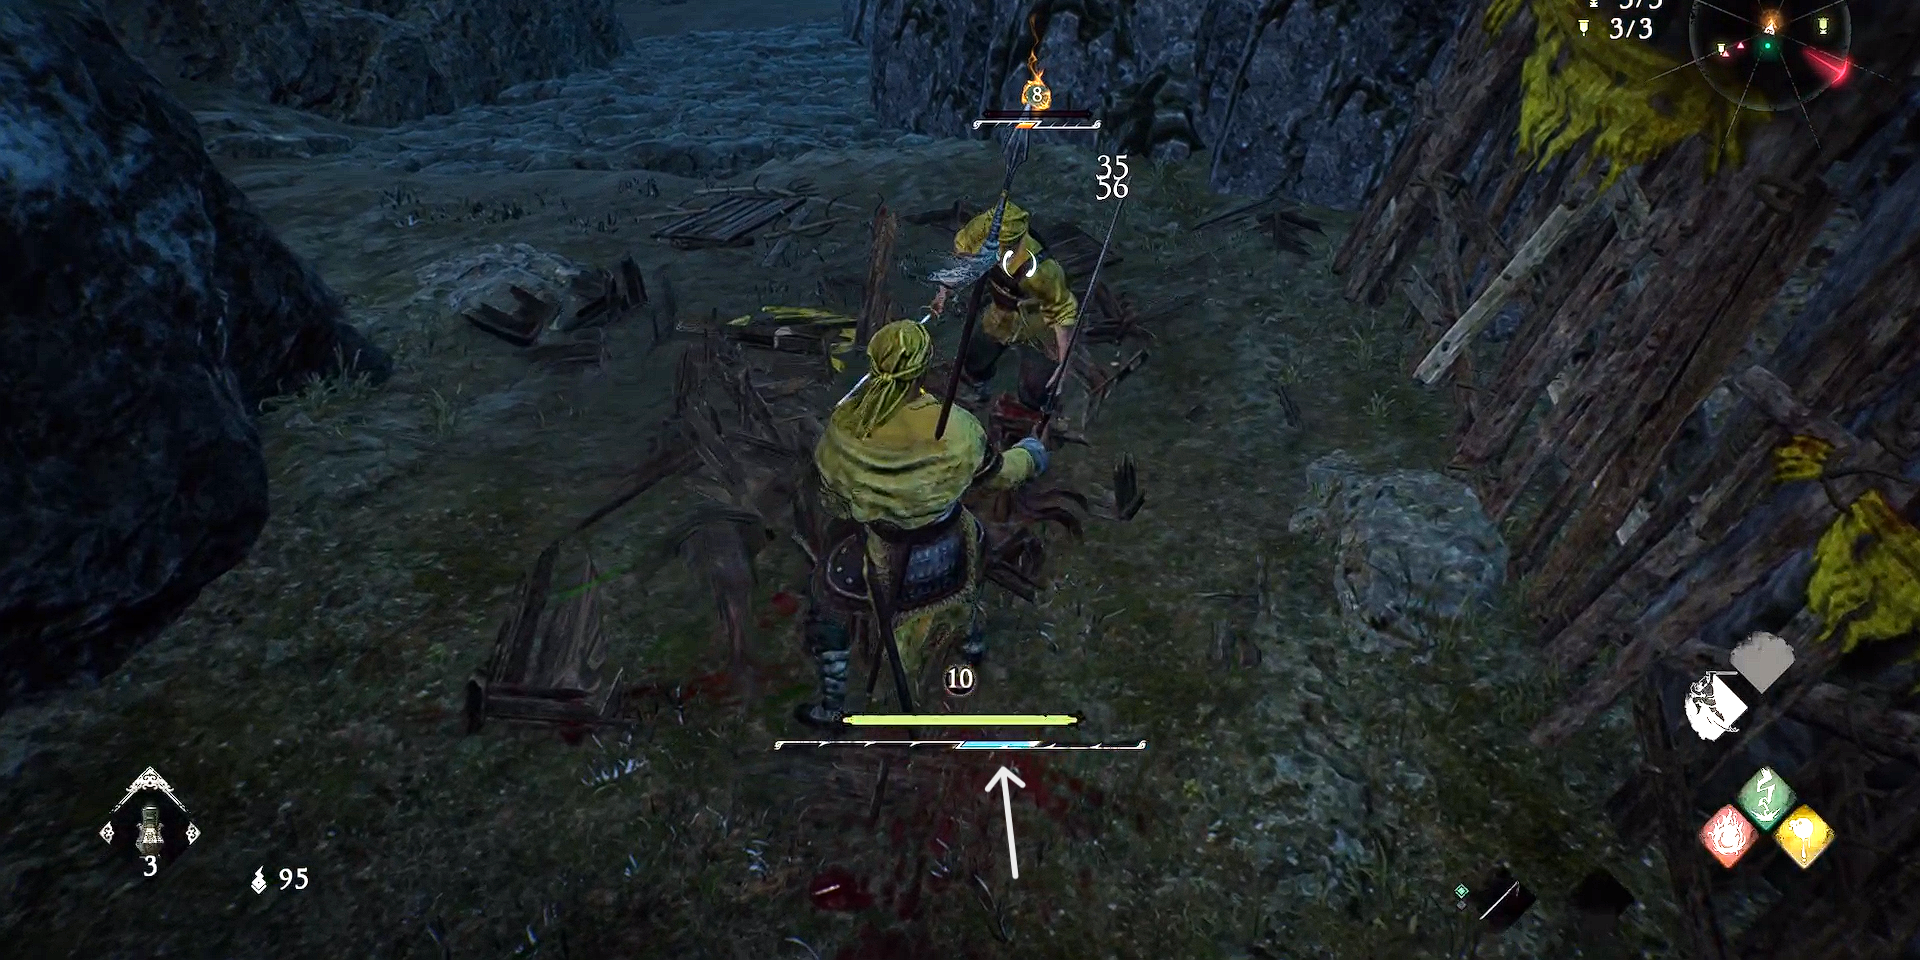 Example of yang measure of morale (in blue) in Fallen Crouching Dragon